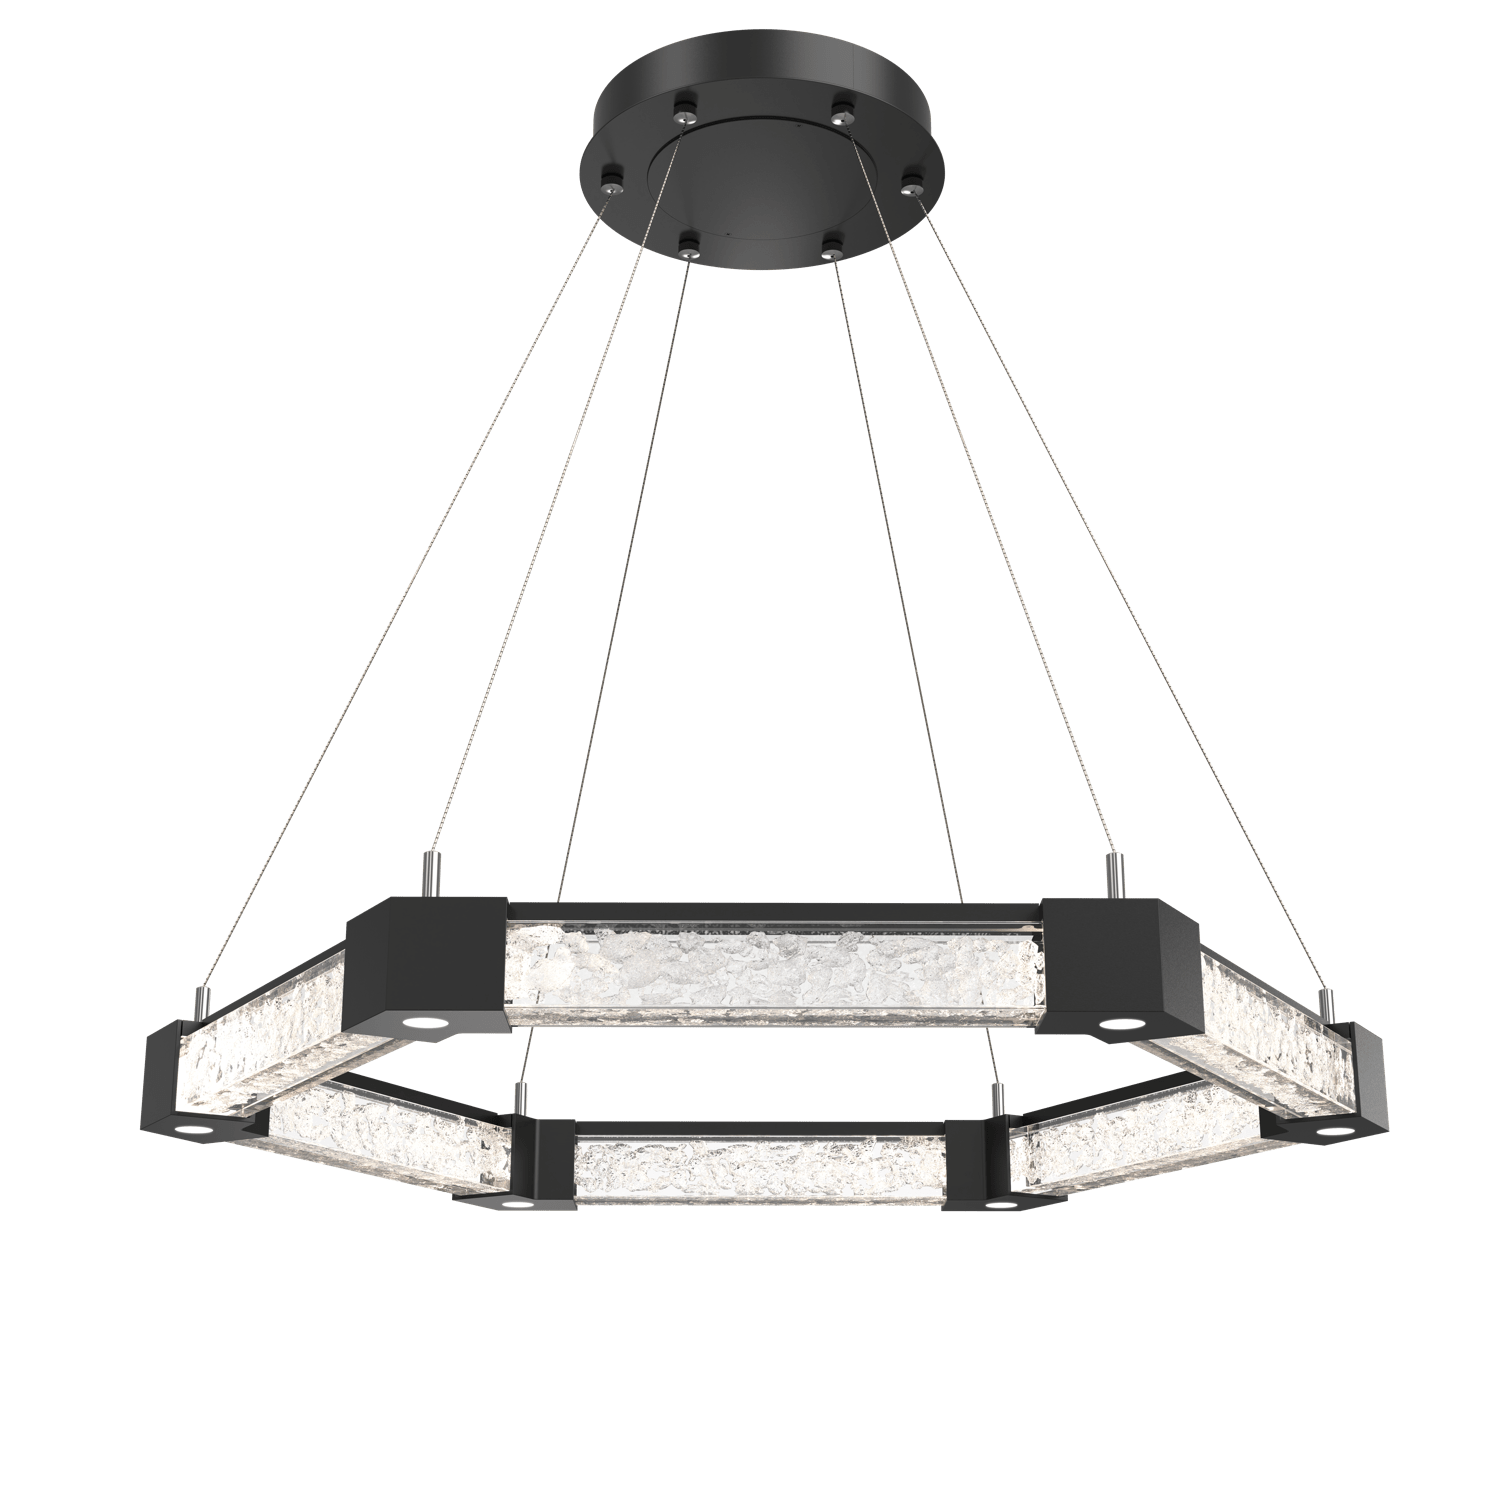 CHB0060-35-MB-GC-Hammerton-Studio-Axis-Hexagonal-Ring-Chandelier-with-Matte-Black-finish-and-clear-cast-glass-and-LED-lamping